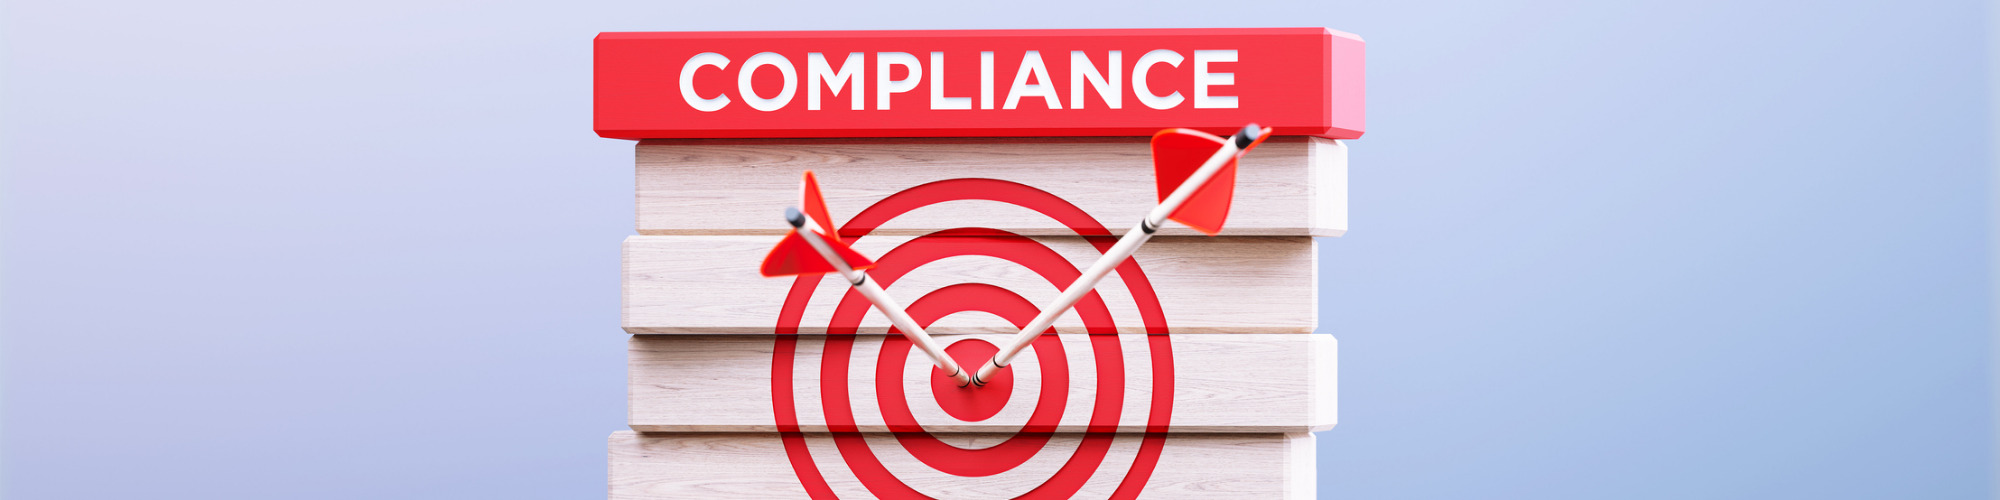 Creating an Ethical Framework & Encouraging Compliance - A ‘How To’ Guide 